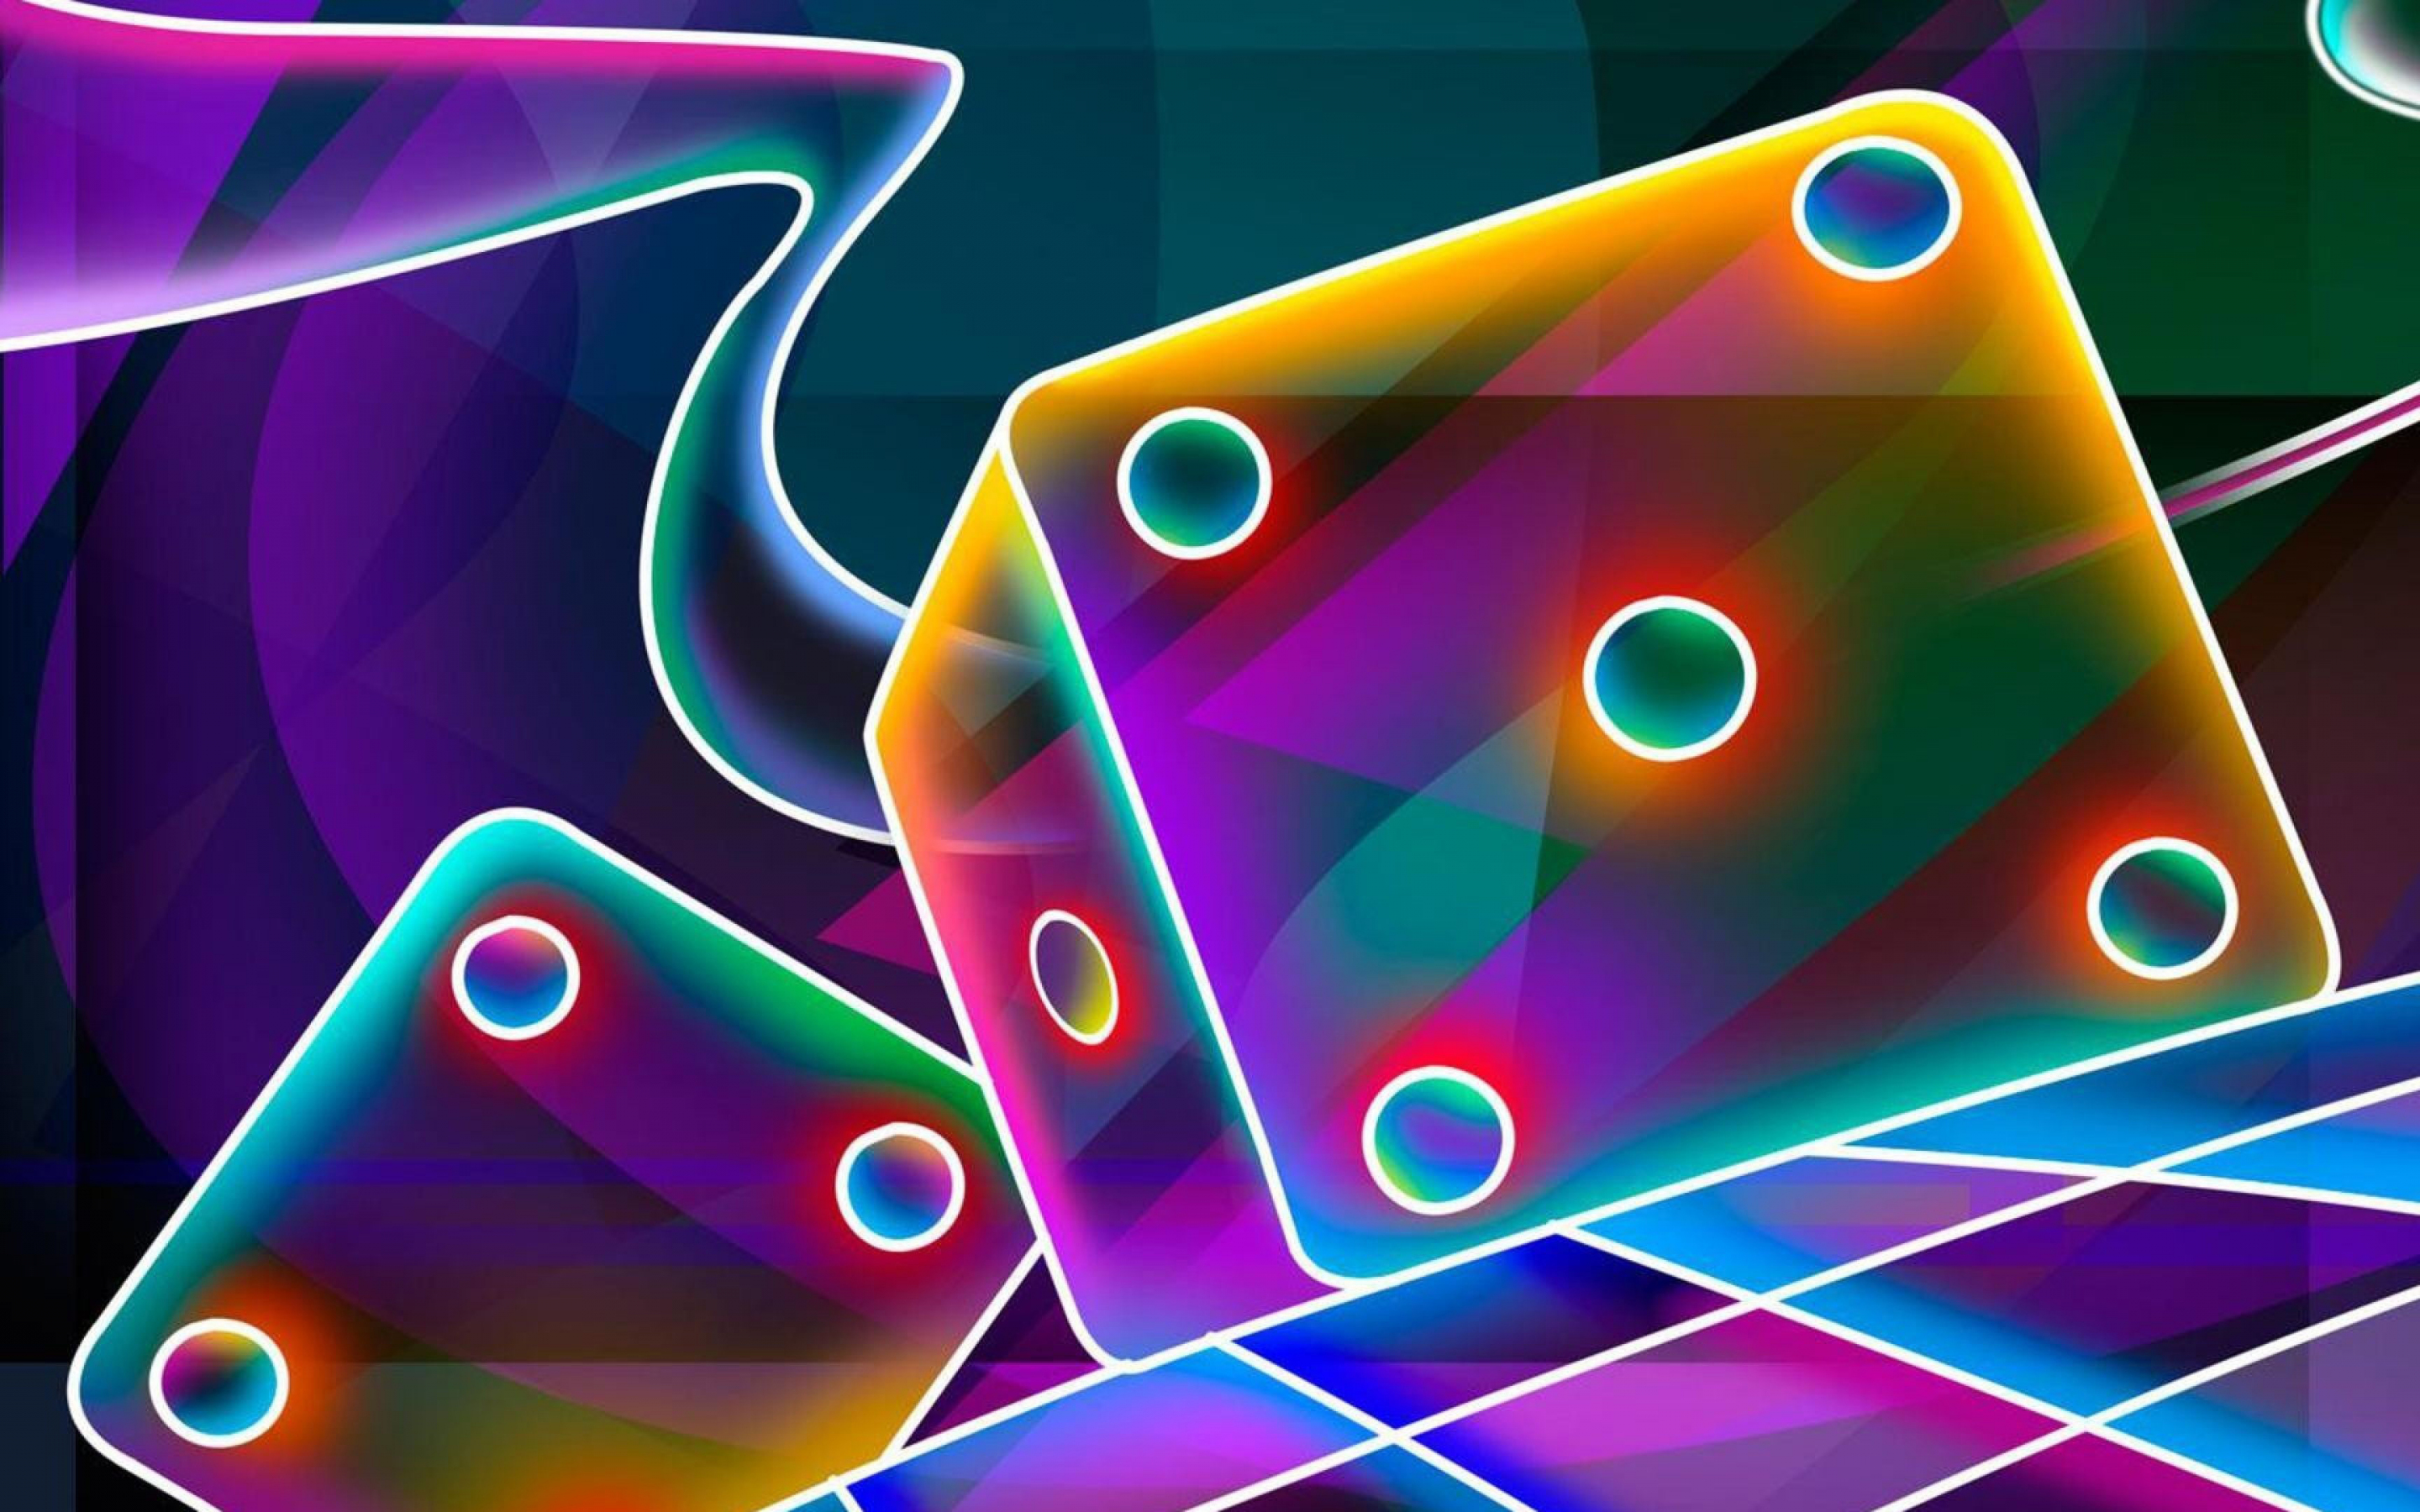 Cubes, transparent and colorful, abstract, 2880x1800 wallpaper